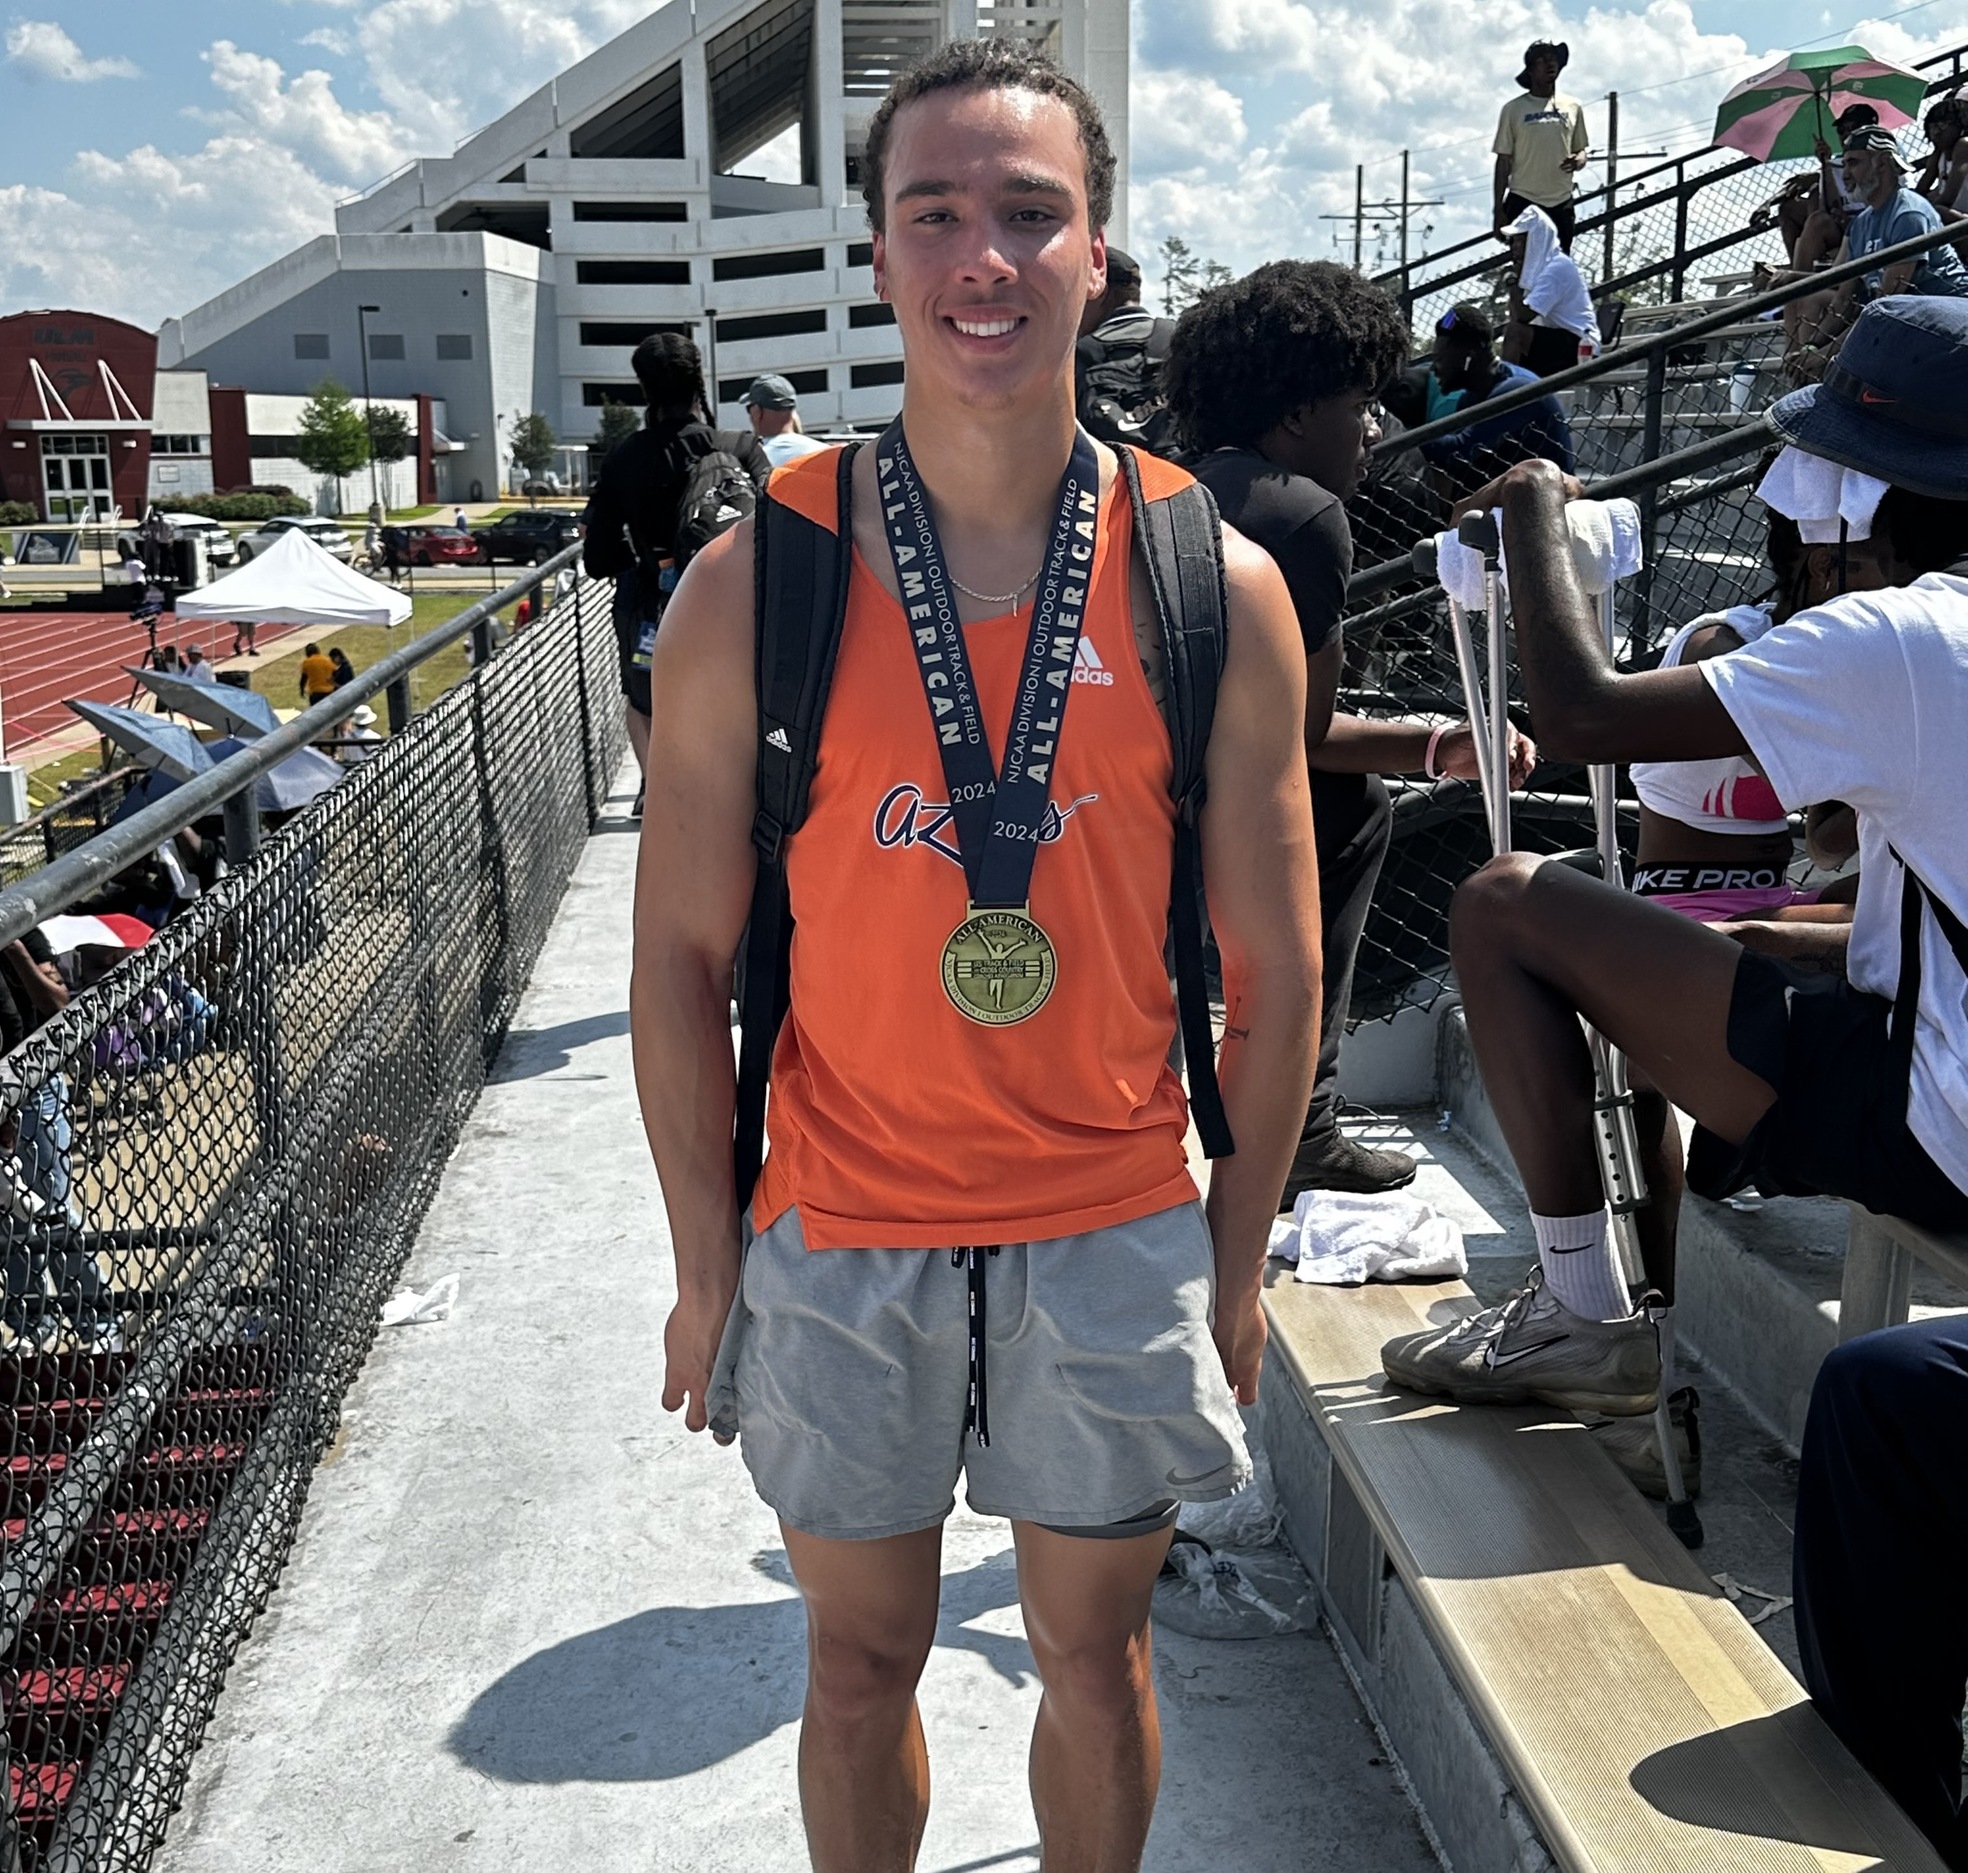 Freshman Jordan Cortner took seventh place in the 400-meter hurdles with a time of 53.77 seconds as Aztecs Men's Track & Field finished in 12th place with 20.5 points. It was their best team standing placement and most points scored at the NJCAA Outdoor National Championships since 2017. The Aztecs set four new Pima school records and 18 NJCAA All-Americans between the 2024 Indoor and Outdoor seasons. Photo courtesy Chad Harrison